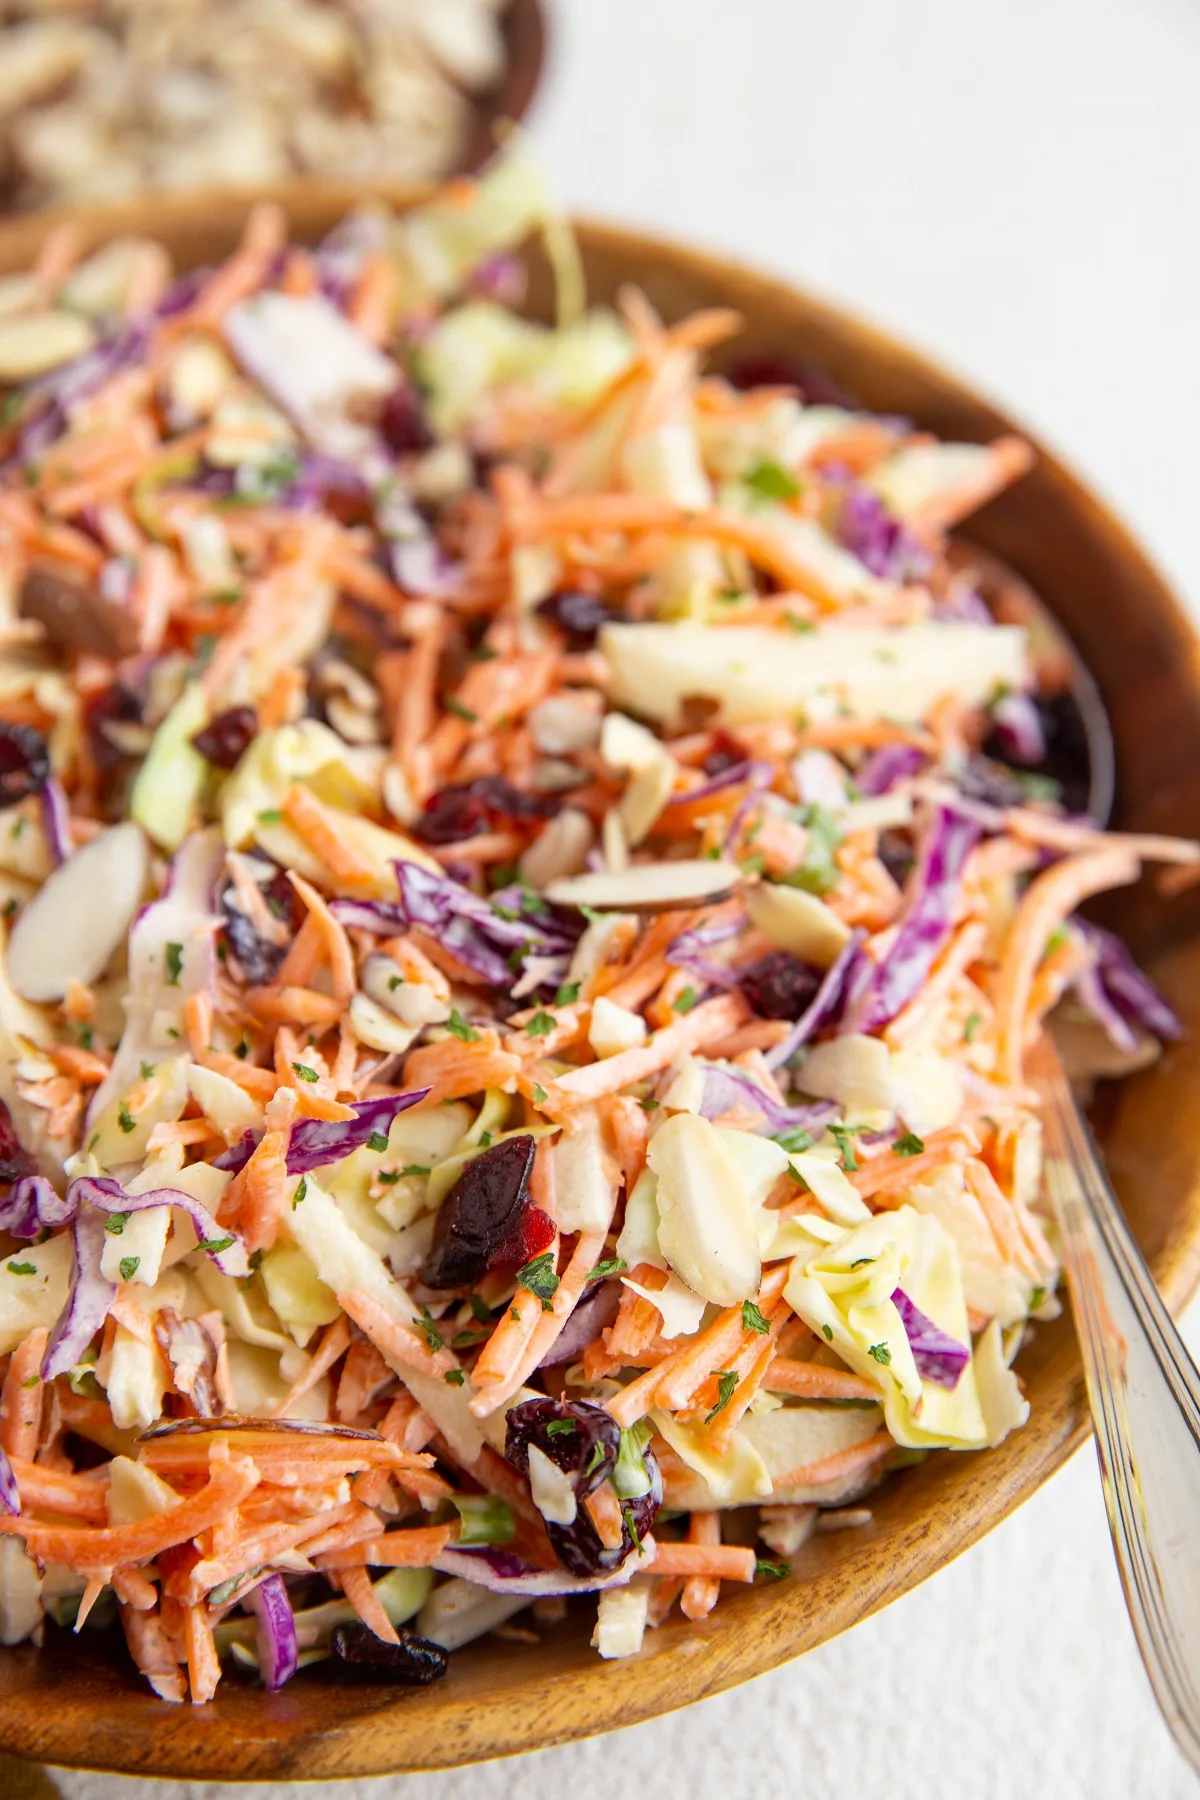 Big wooden bowl full of carrot slaw with a spoon to the side, ready to serve.